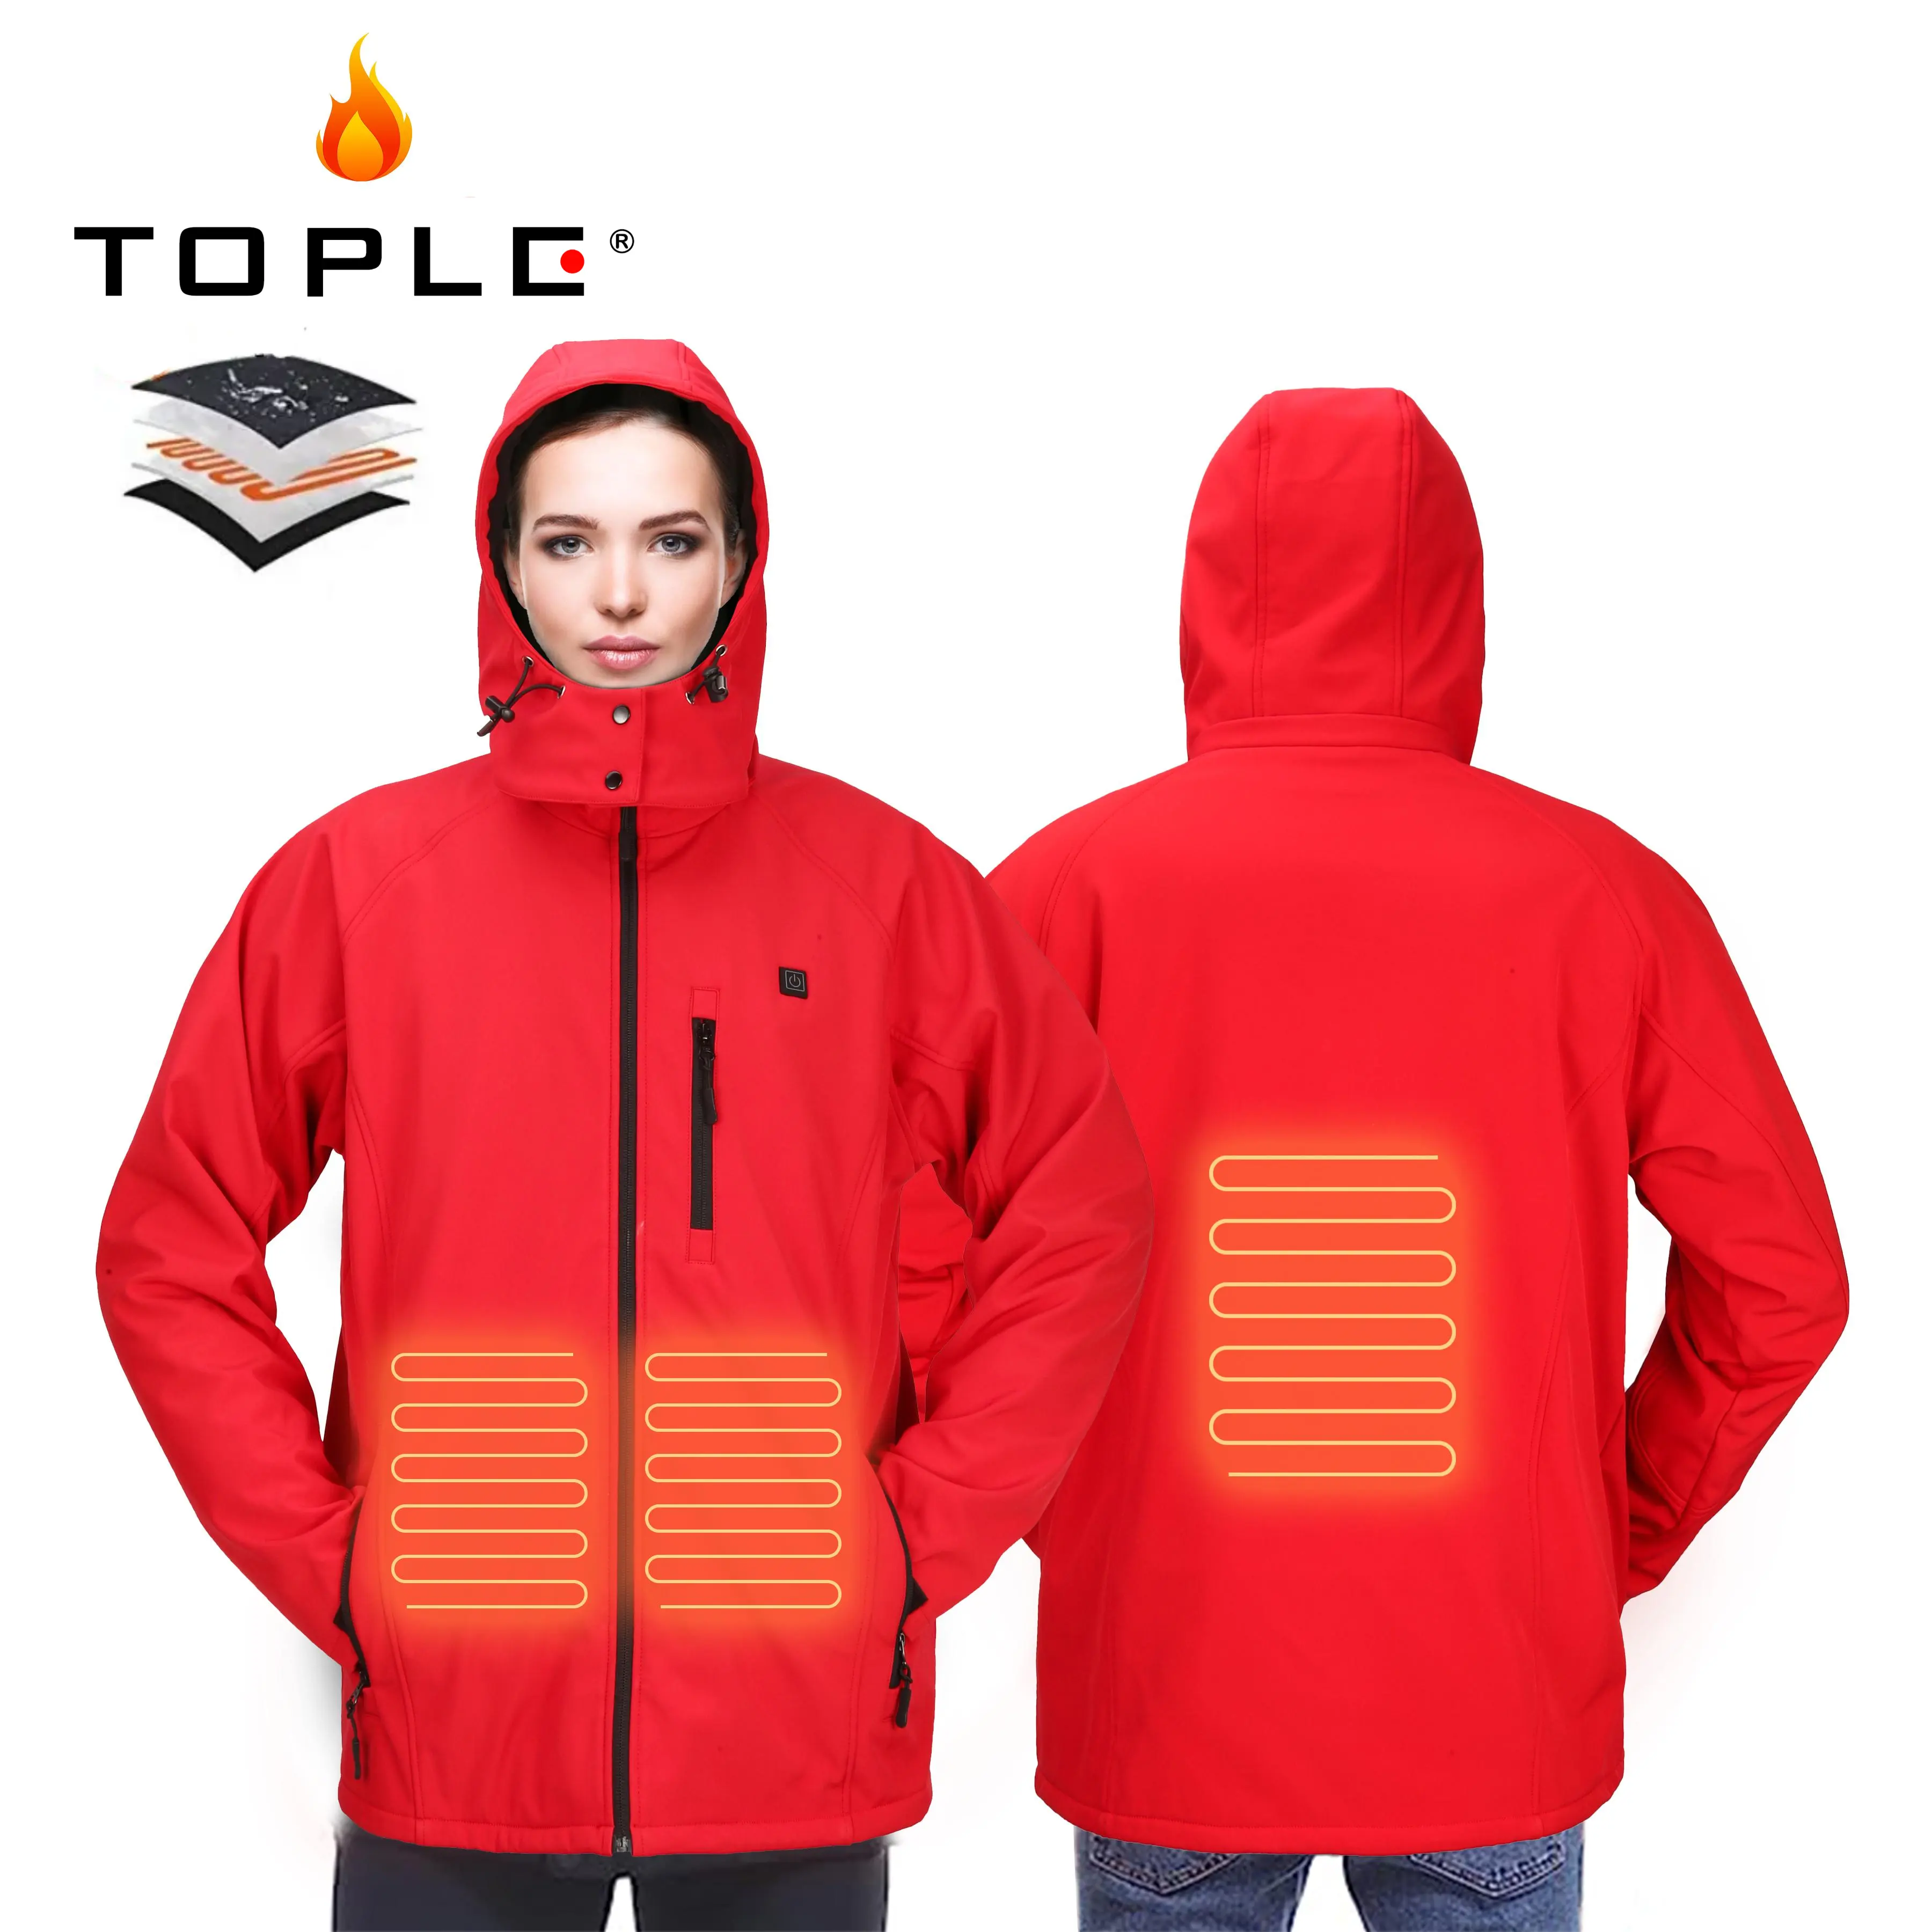 Custom Design 3 Heating Levels Men's Heated Jacket Warmer Plus Size Jacket Heated Clothing for Winter Outdoor Camping